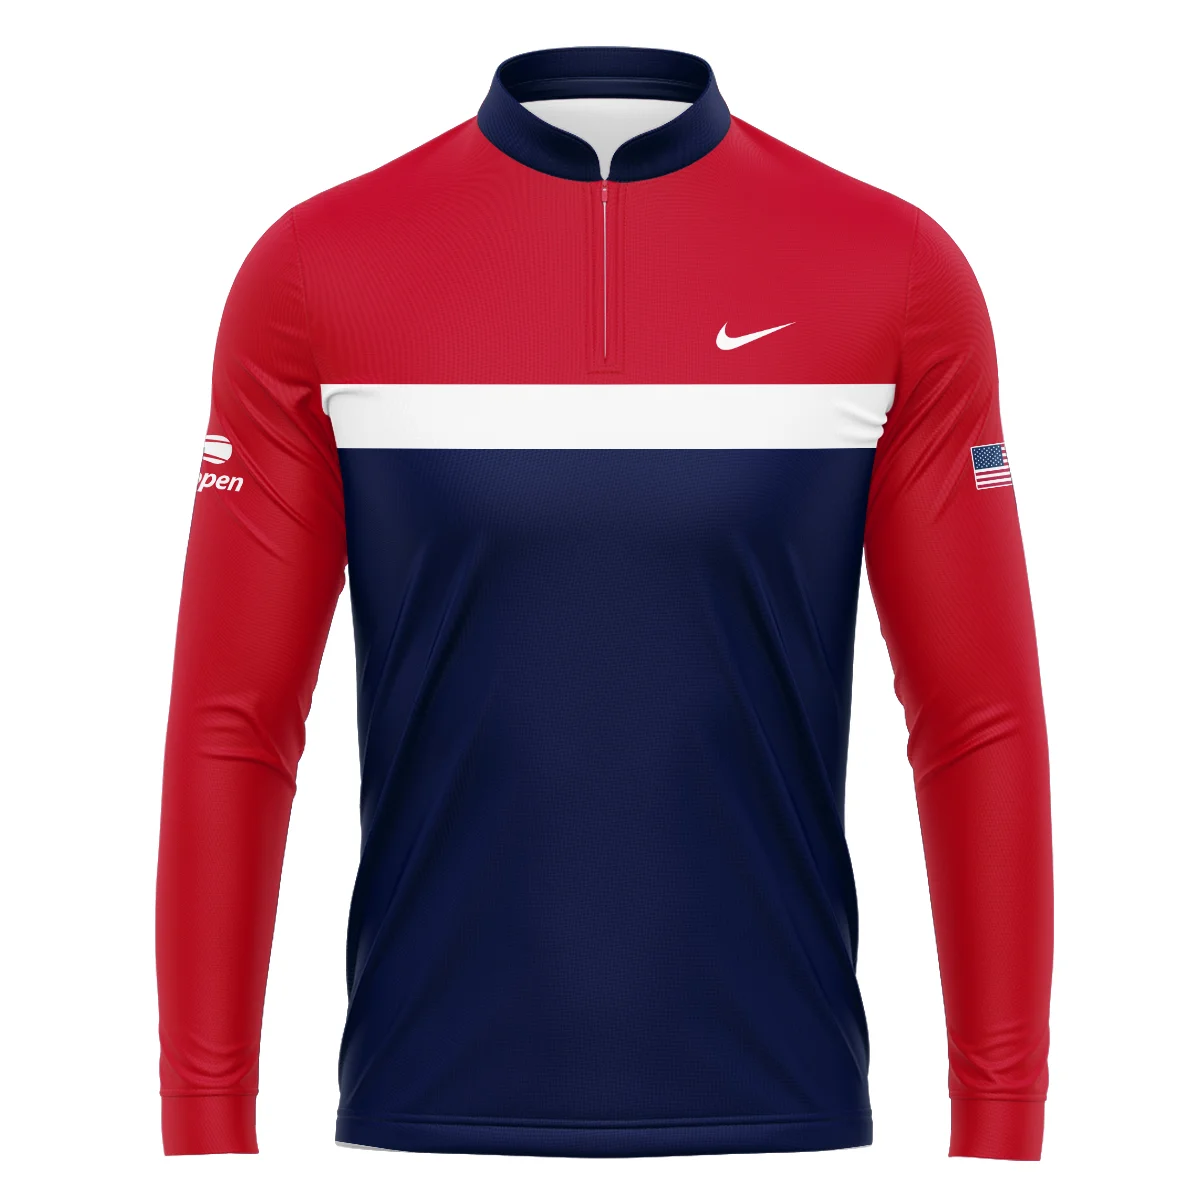 Nike Blue Red White Background US Open Tennis Champions Hoodie Shirt Style Classic Hoodie Shirt